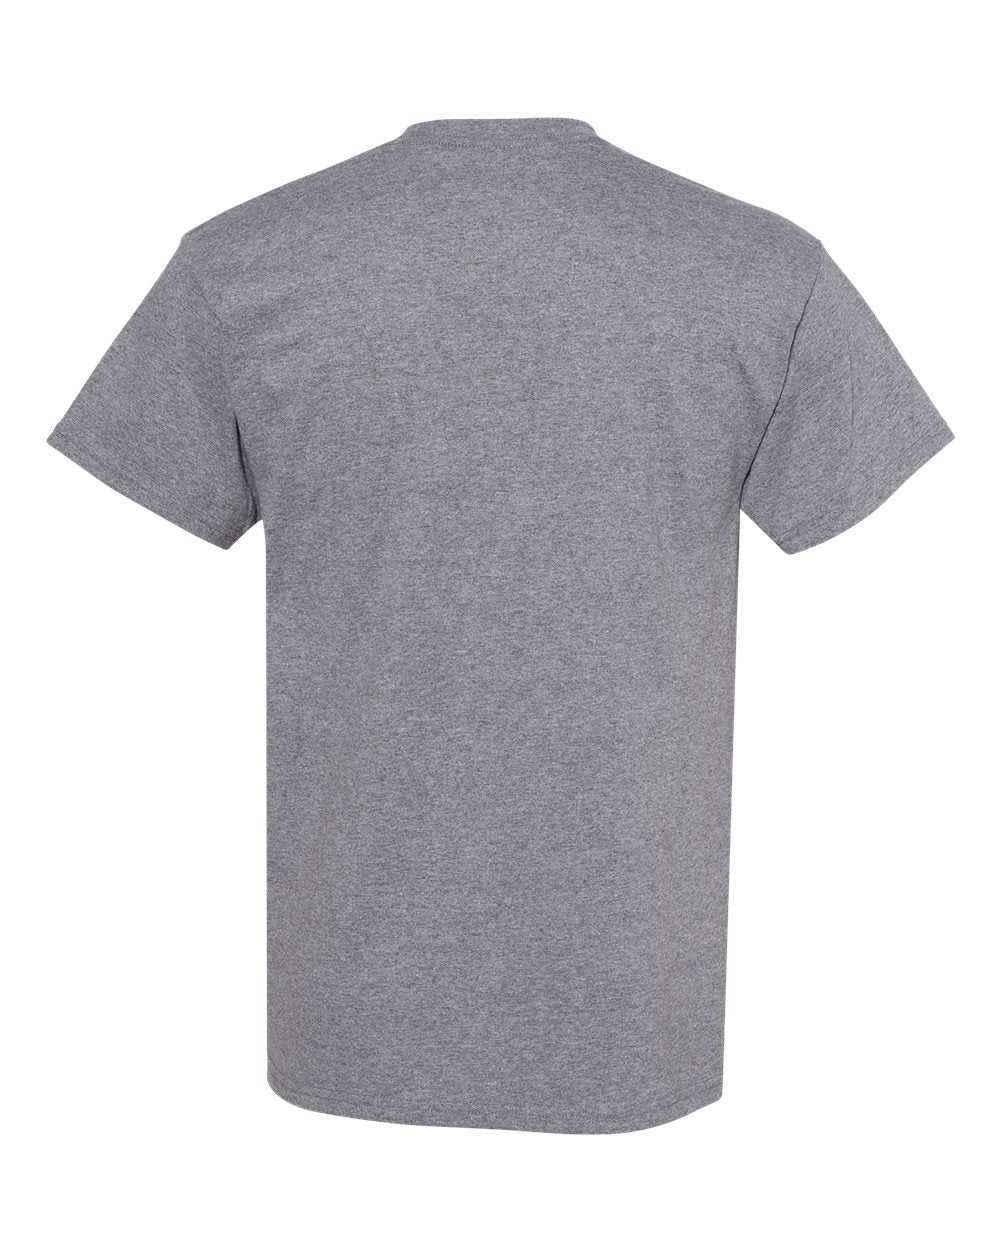 Alstyle 1905 Heavyweight Adult Pocket Tee - Graphite Heather - HIT a Double